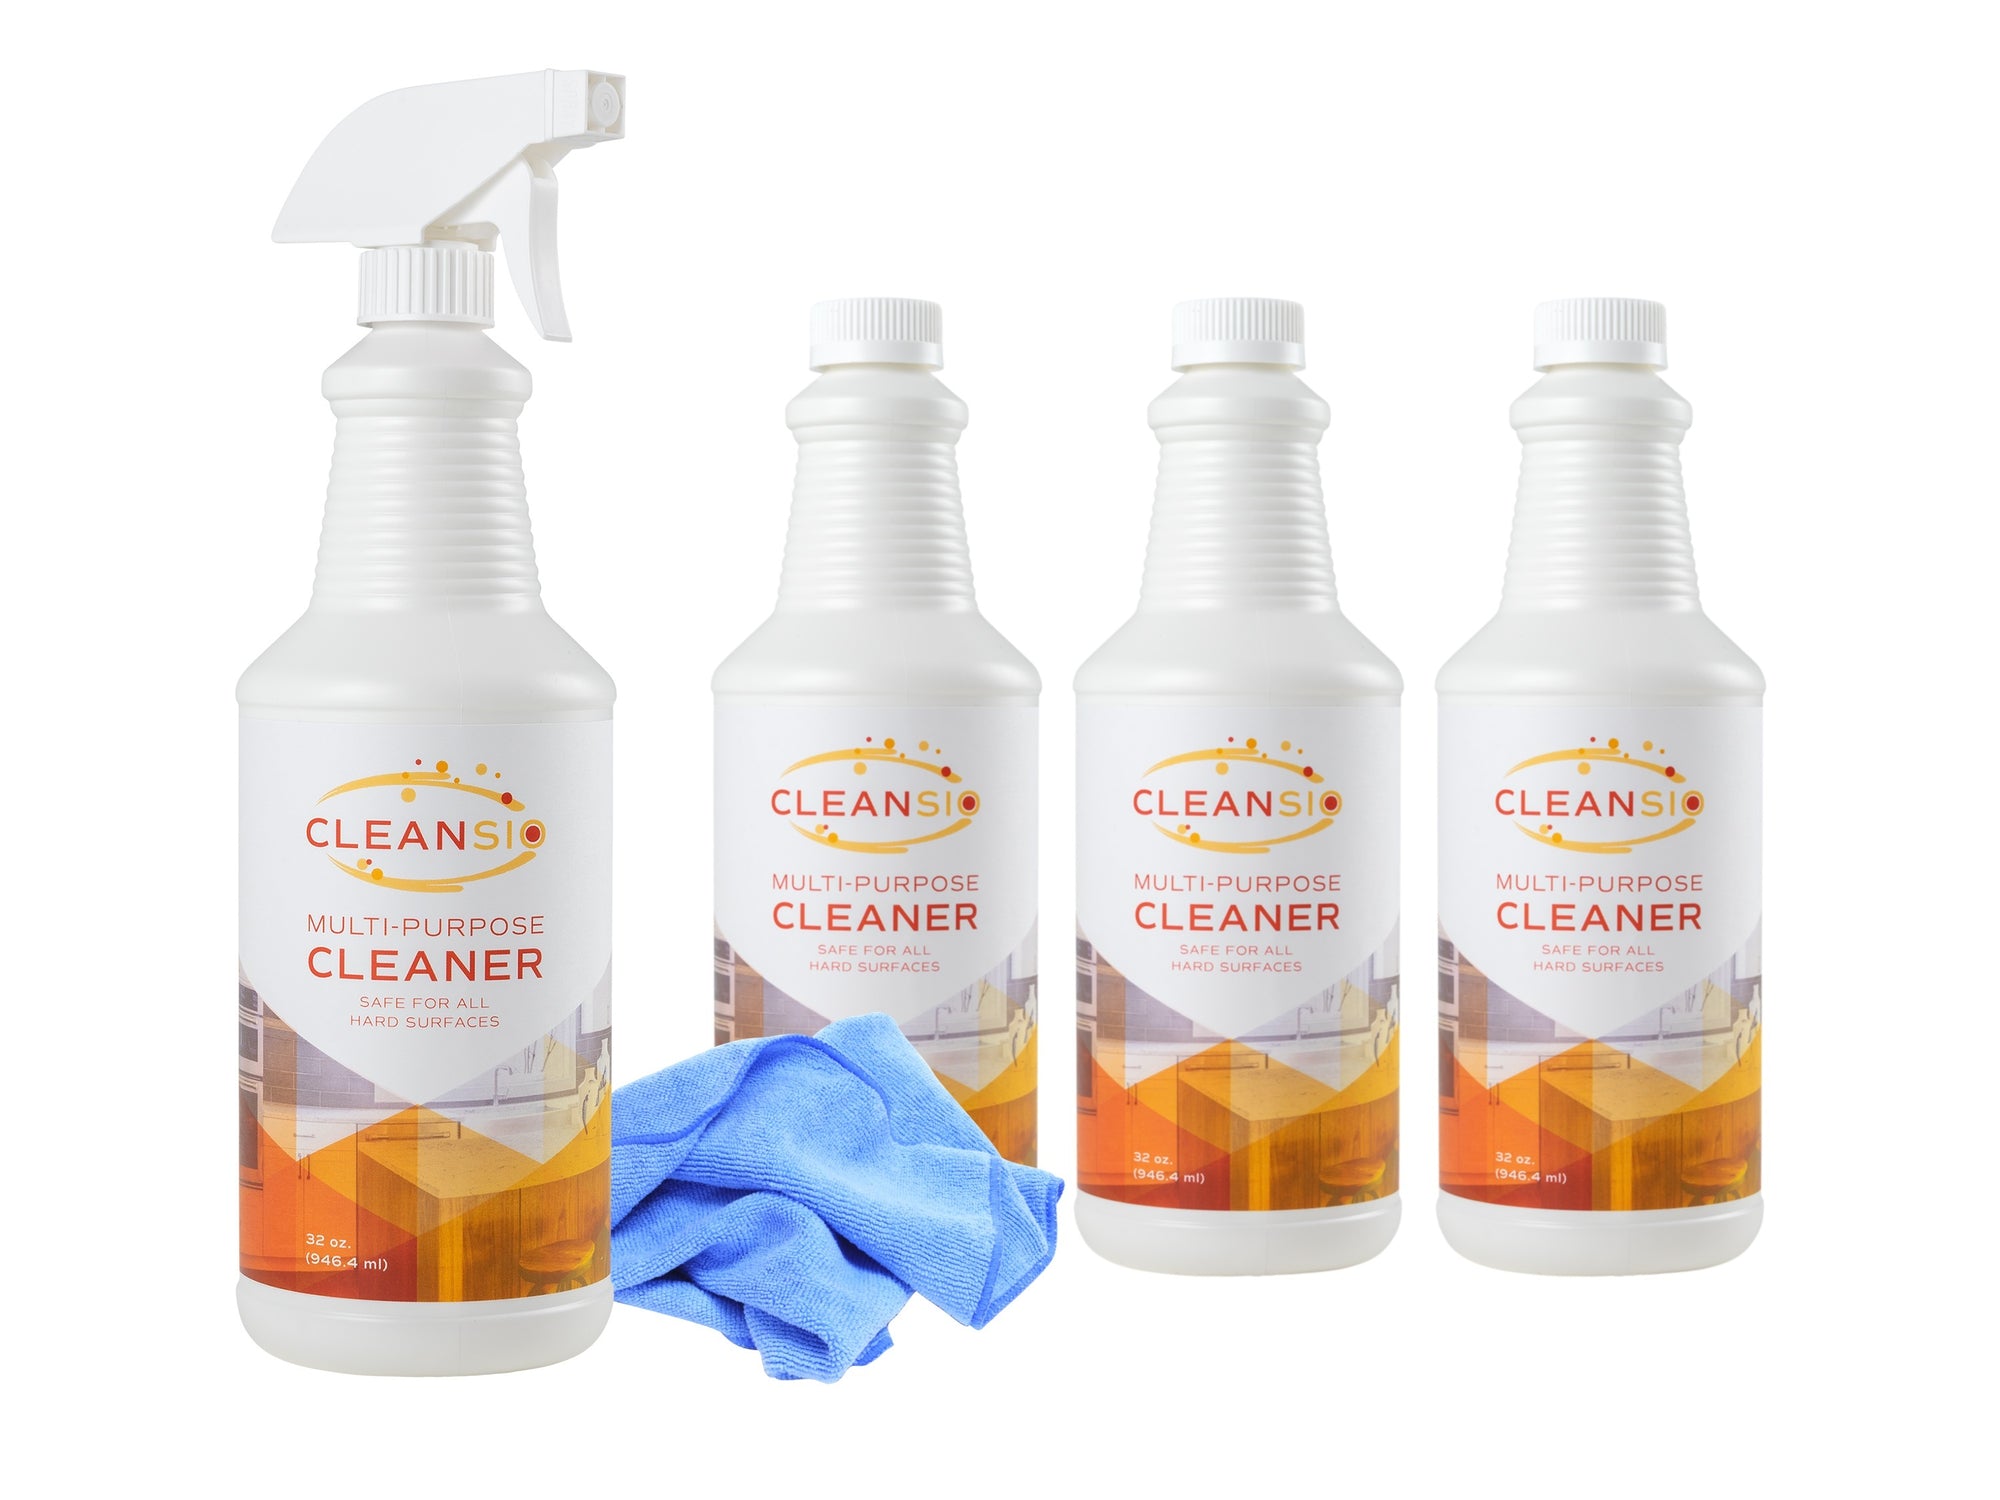 Cleansio Multi-Purpose Cleaner Family Bundle – Fragrance Free, 32 oz – 4 pack, Sprayer Nozzle, and Microfiber Towel